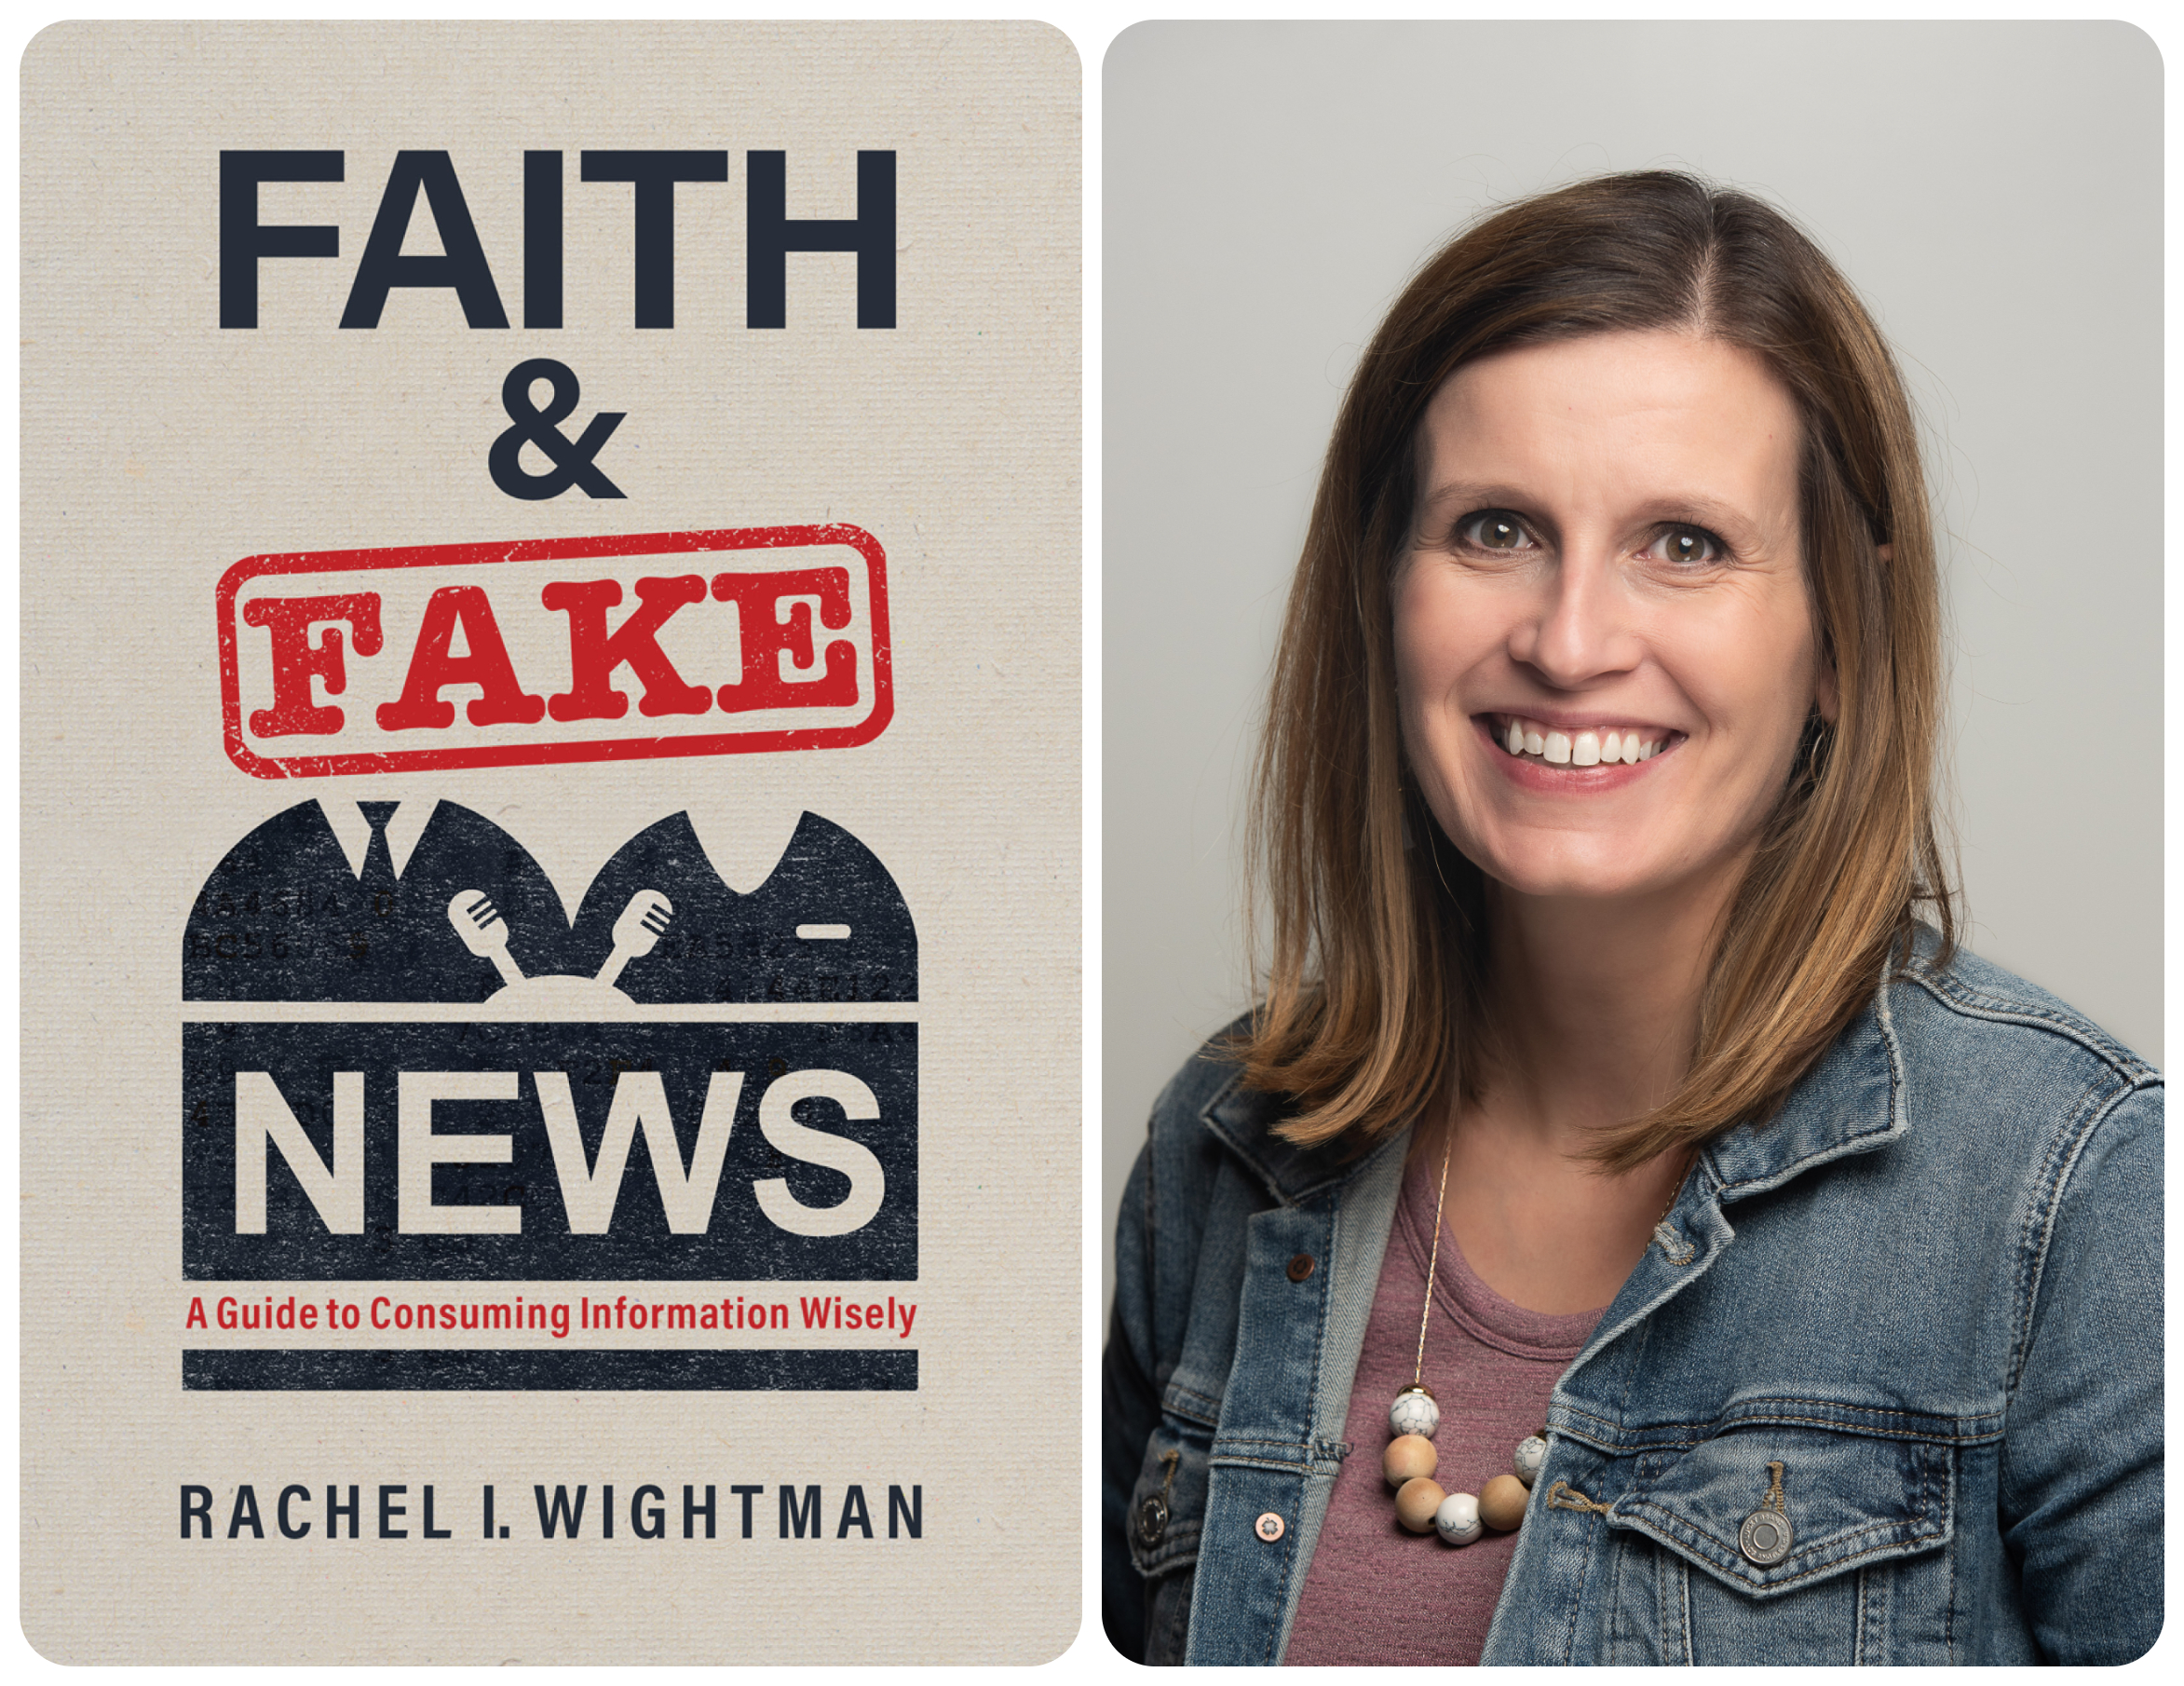 New Book Teaches Christians to Find Nuance in News